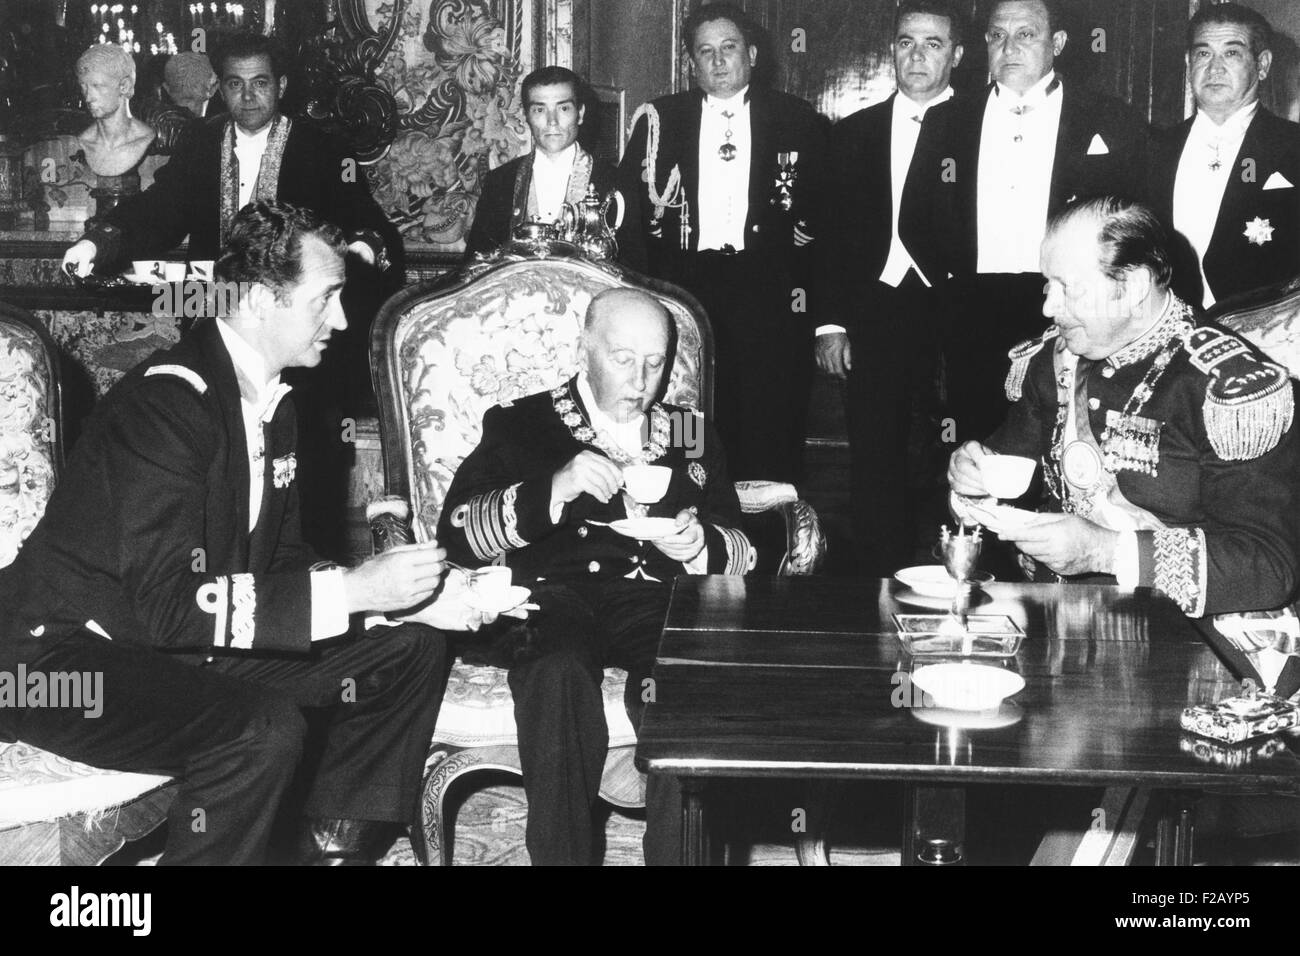 Spanish dictator Francisco Franco (center), hosts Prince Juan Carlos and Gen. Alfredo Stroessner. July 20, 1953. For over 20 years, Franco groomed Juan Carlos, his presumed and later designated successor, in his the ultraconservative politics. Stroessner, was the military dictator of Paraguay from 1954 to 1989. (CSU 2015 9 710) Stock Photo